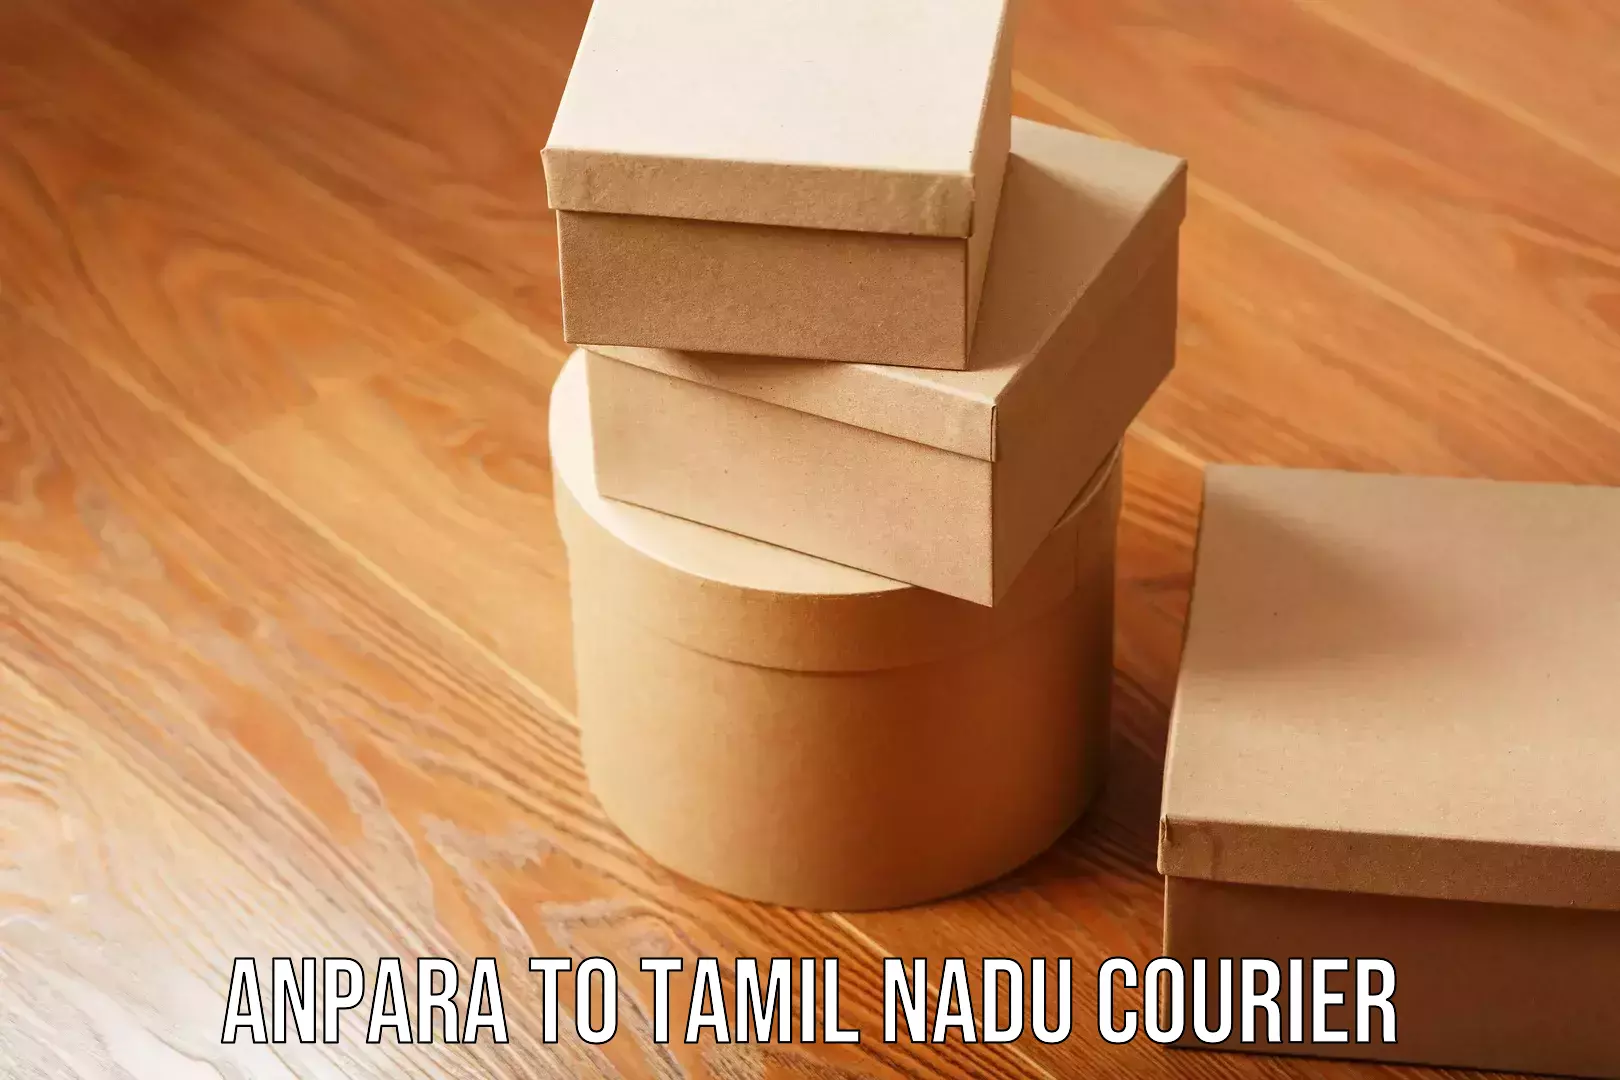 Same-day delivery solutions Anpara to Tamil Nadu